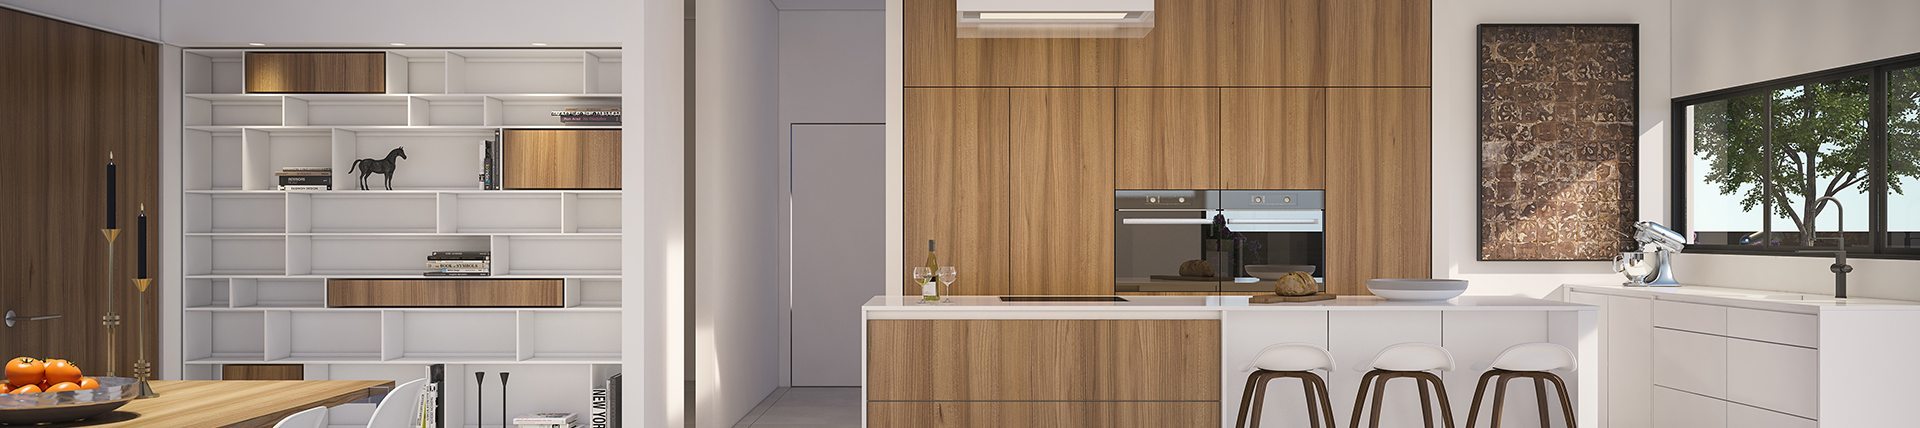 Architectural Visualization, Kitchen, Private Residence